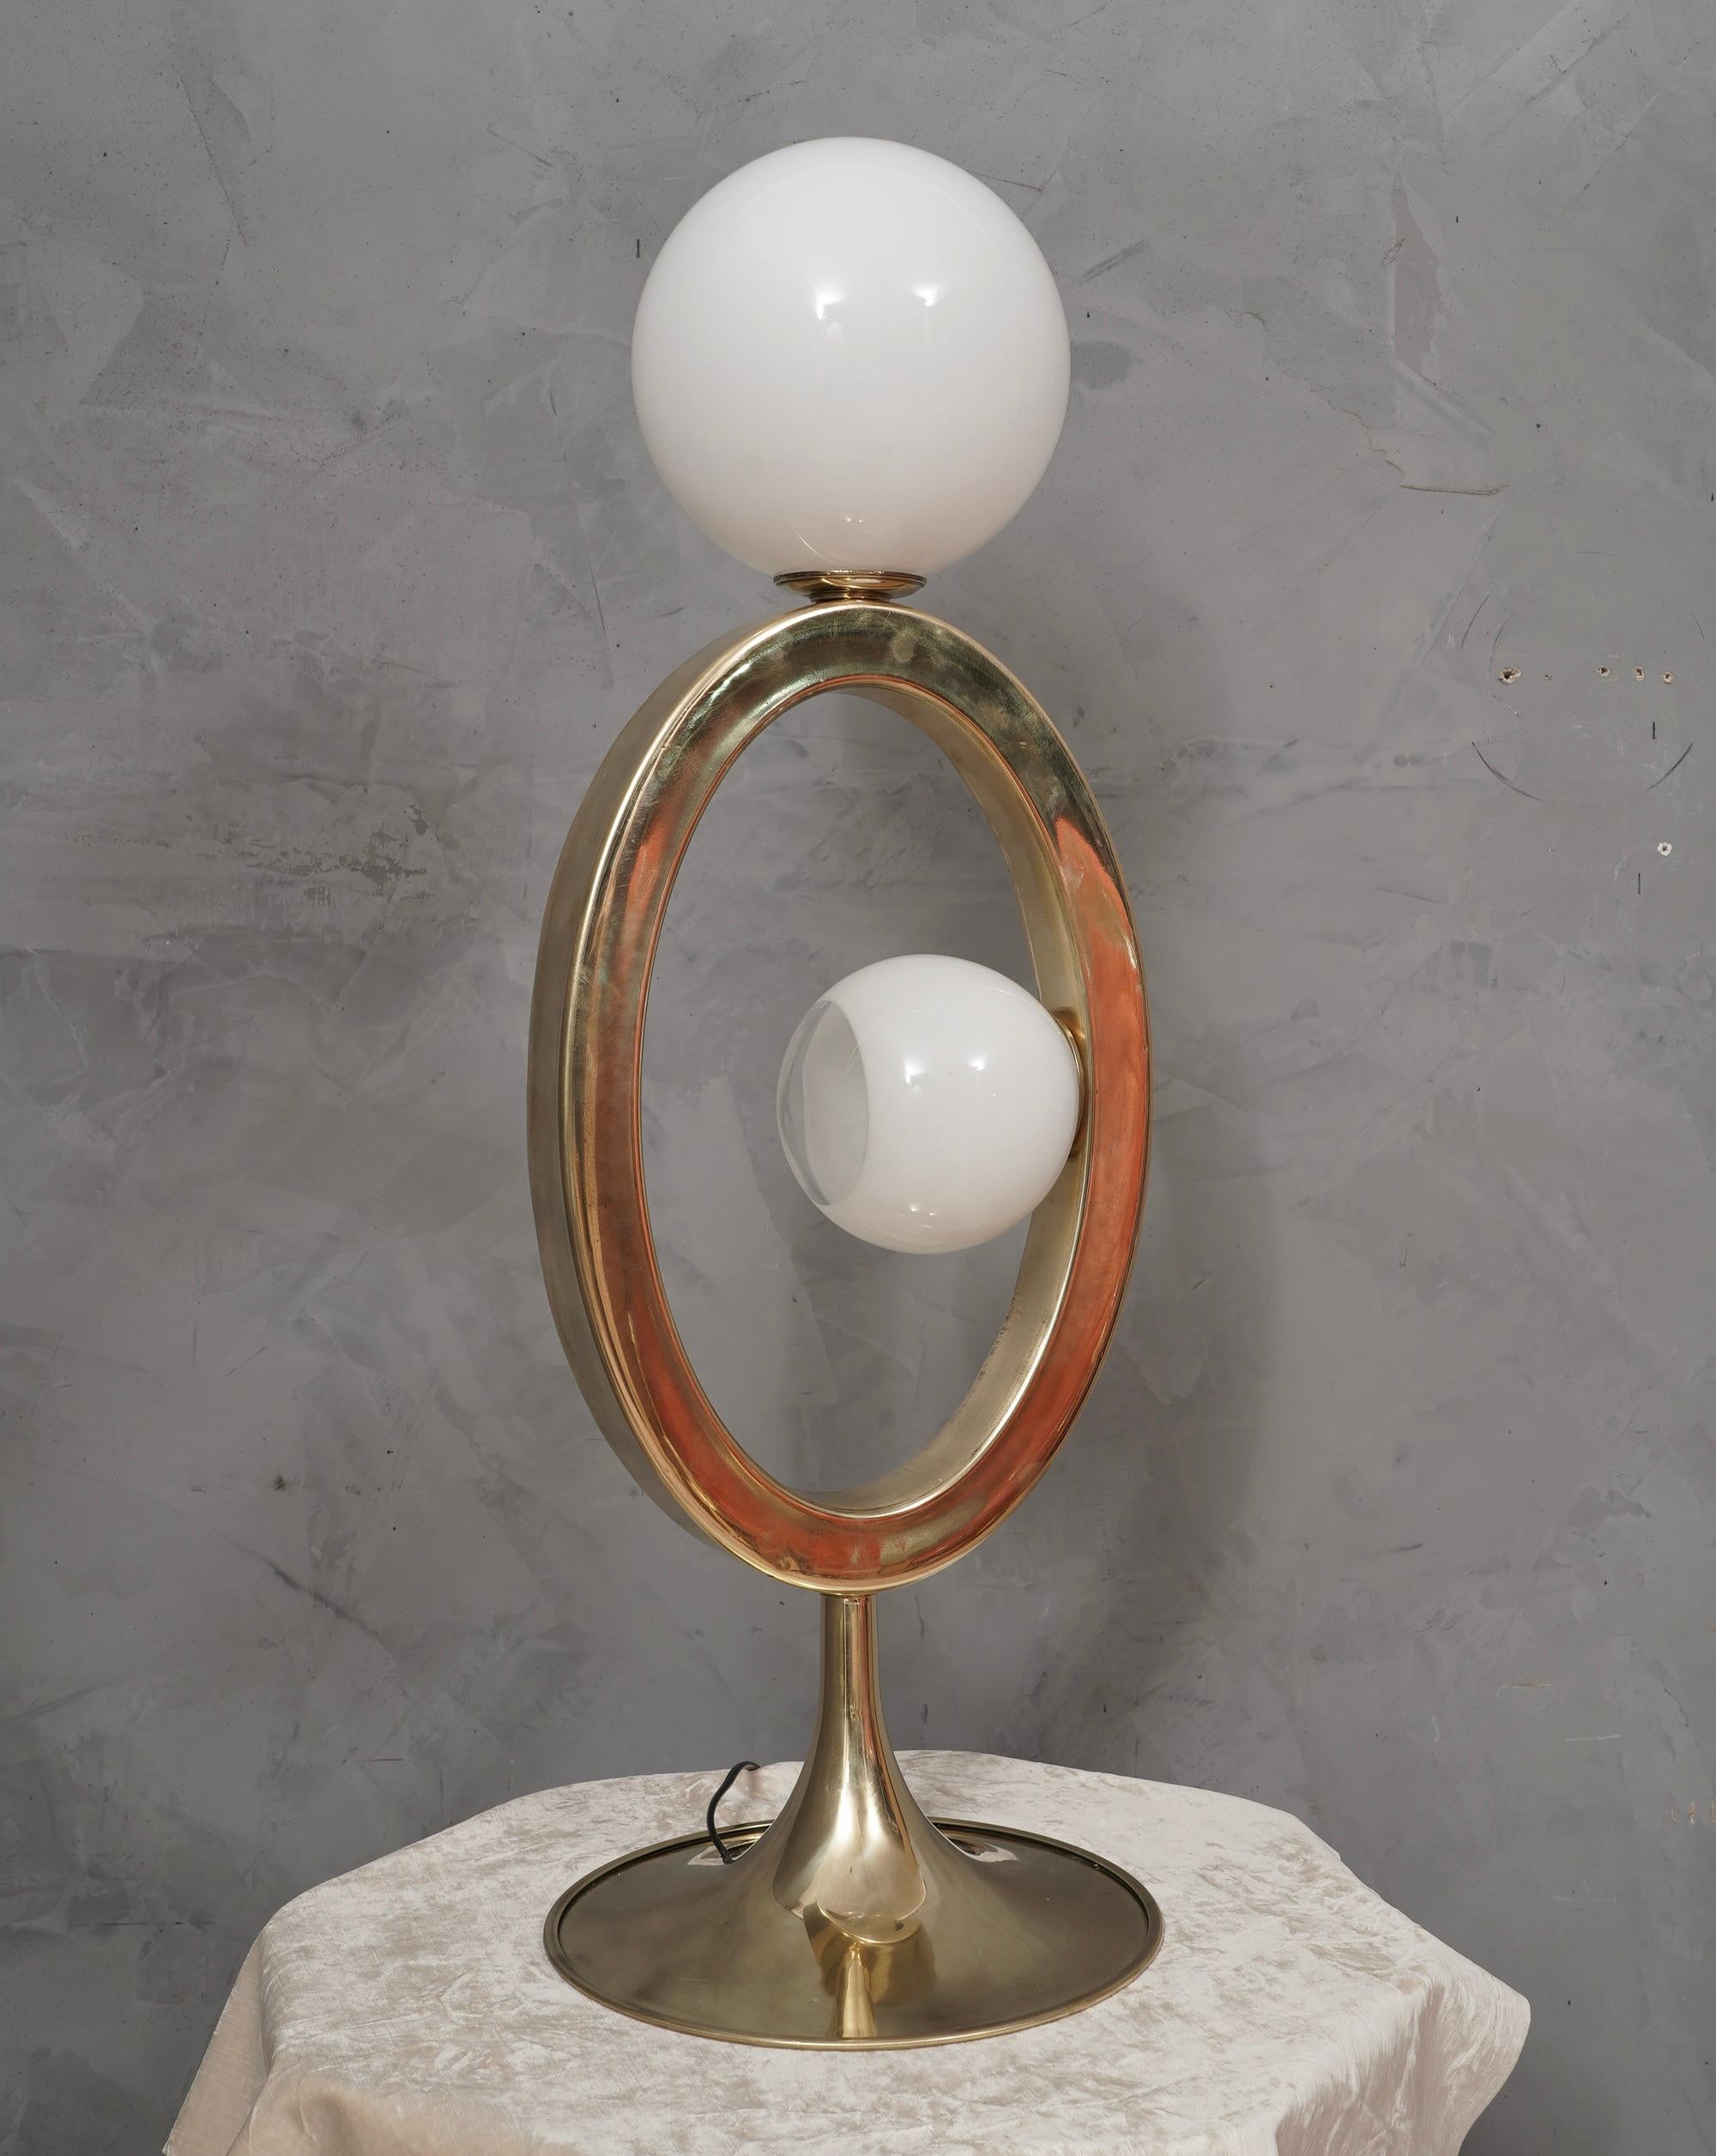 Original and characteristic table lamps in brass and Murano glass. One of a kind design, designed and made especially for our HannauRoma Store.

The lamp is formed by a very modern oval brass structure, to which a white Murano glass sphere has been